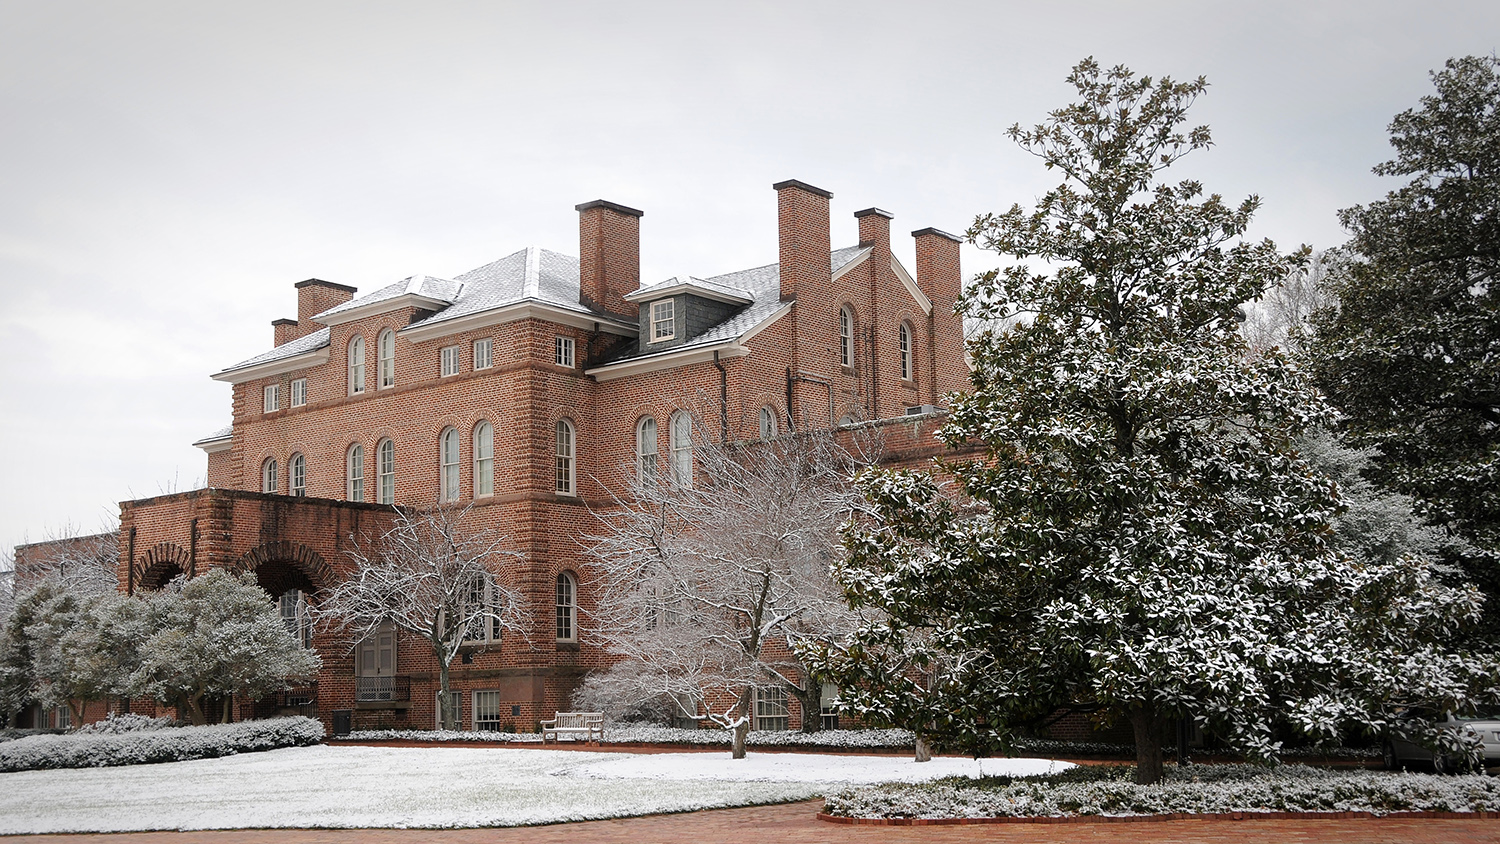 Holladay Hall on a snowy day.